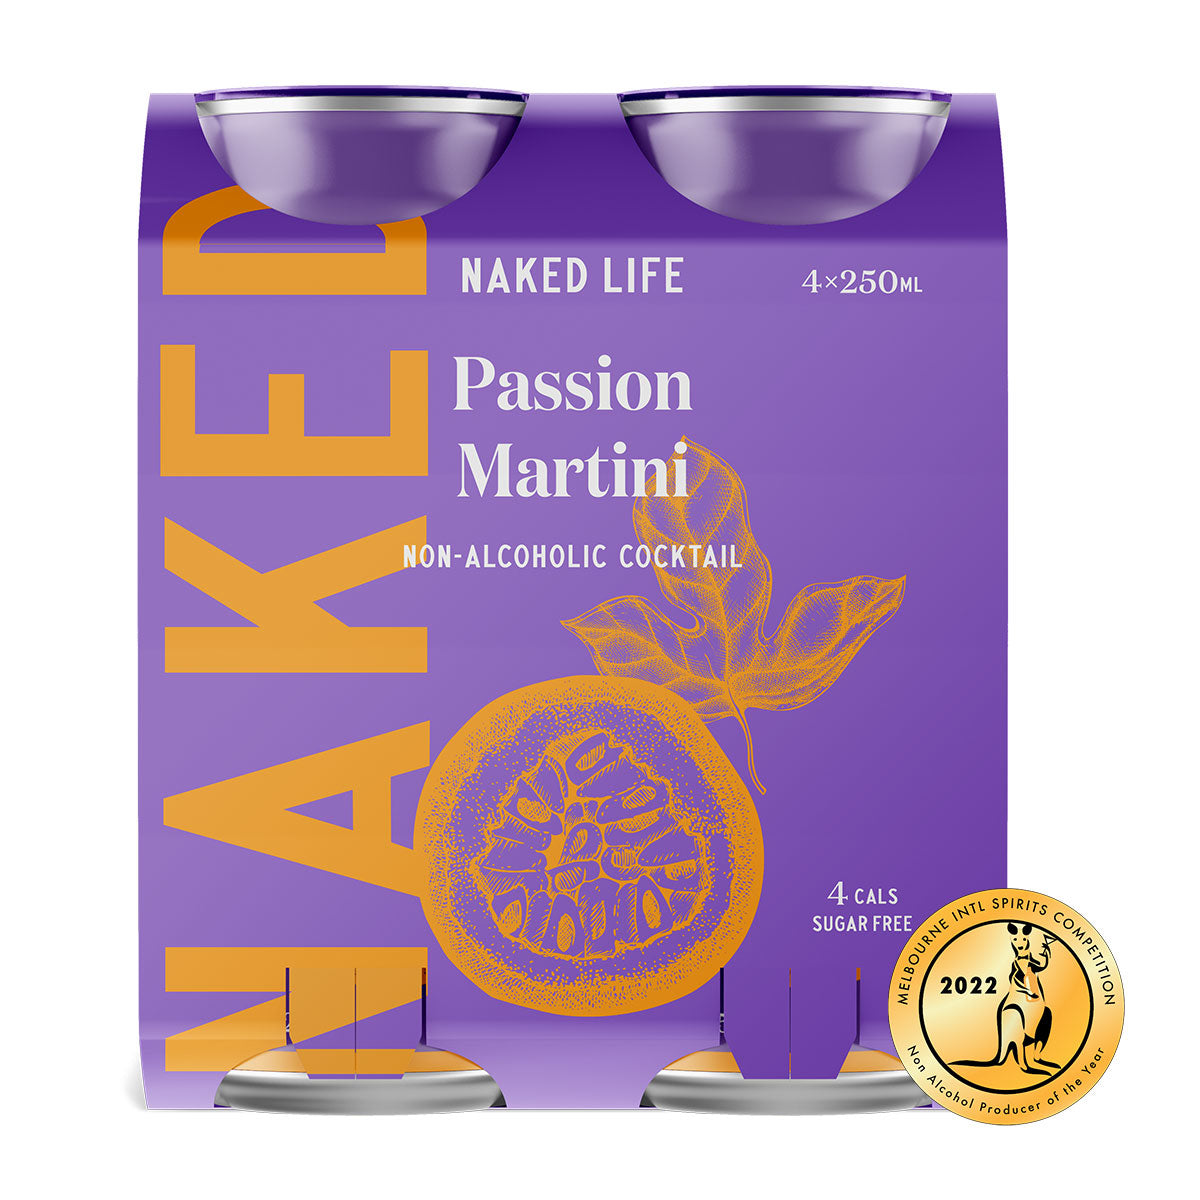 Naked Life Non-Alcoholic Cocktail Passion Martini - 6 x 4 x 250ml Cans